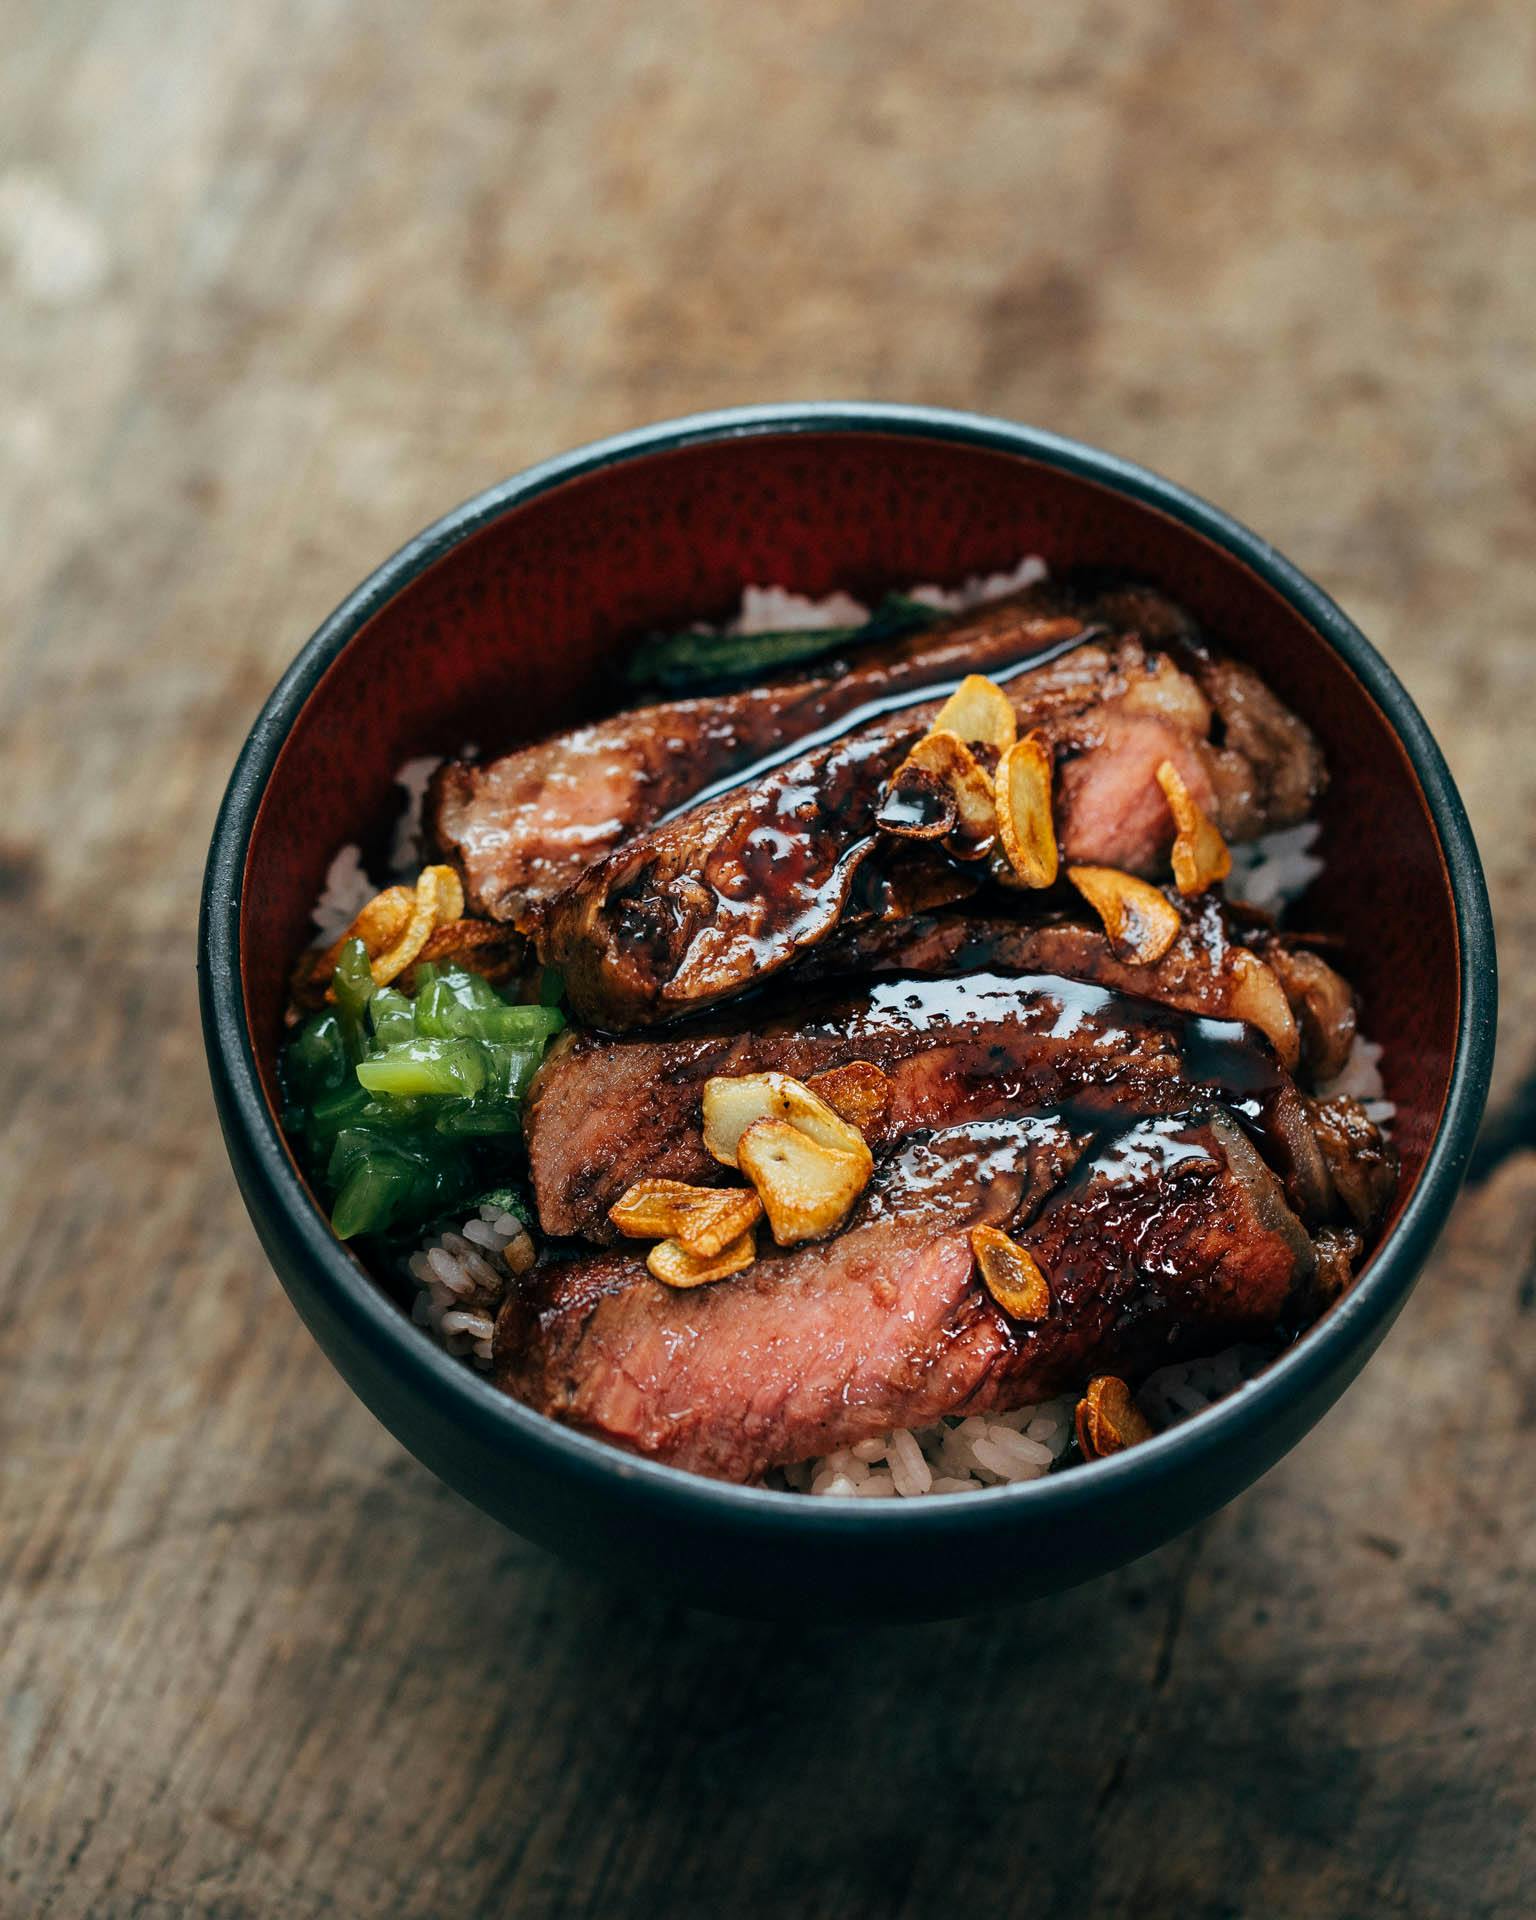 elevate your rice bowls with this ribeye steak donburi topped with